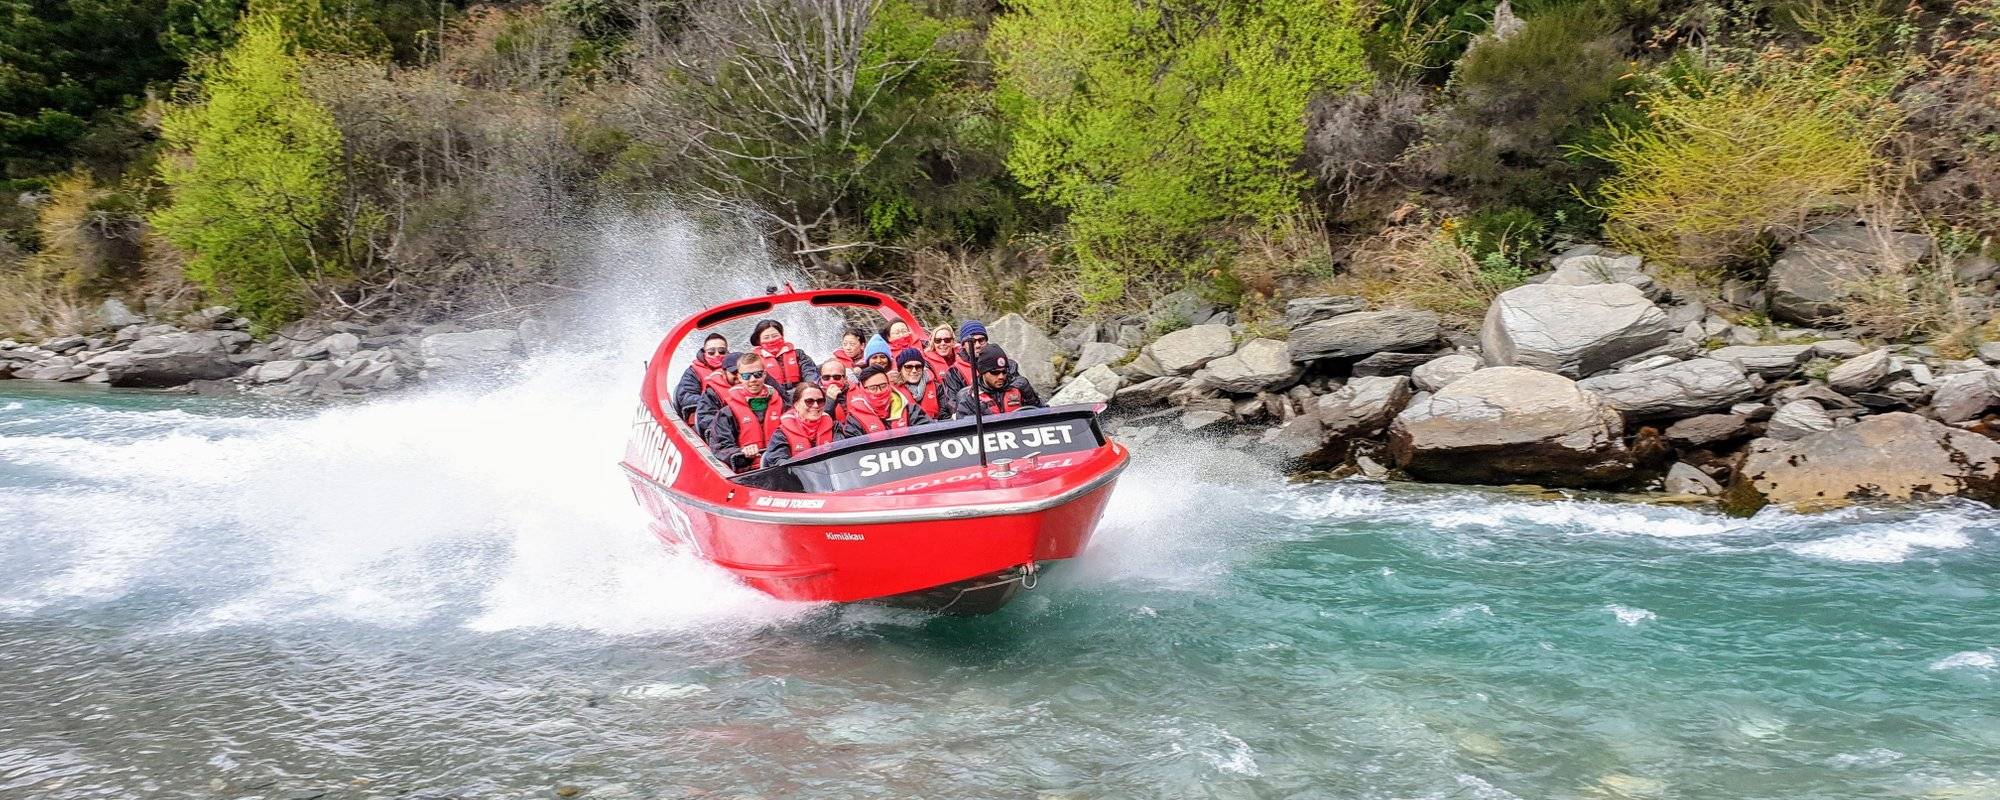 Aussie's in New Zealand: Jet + Boat = Awesome!